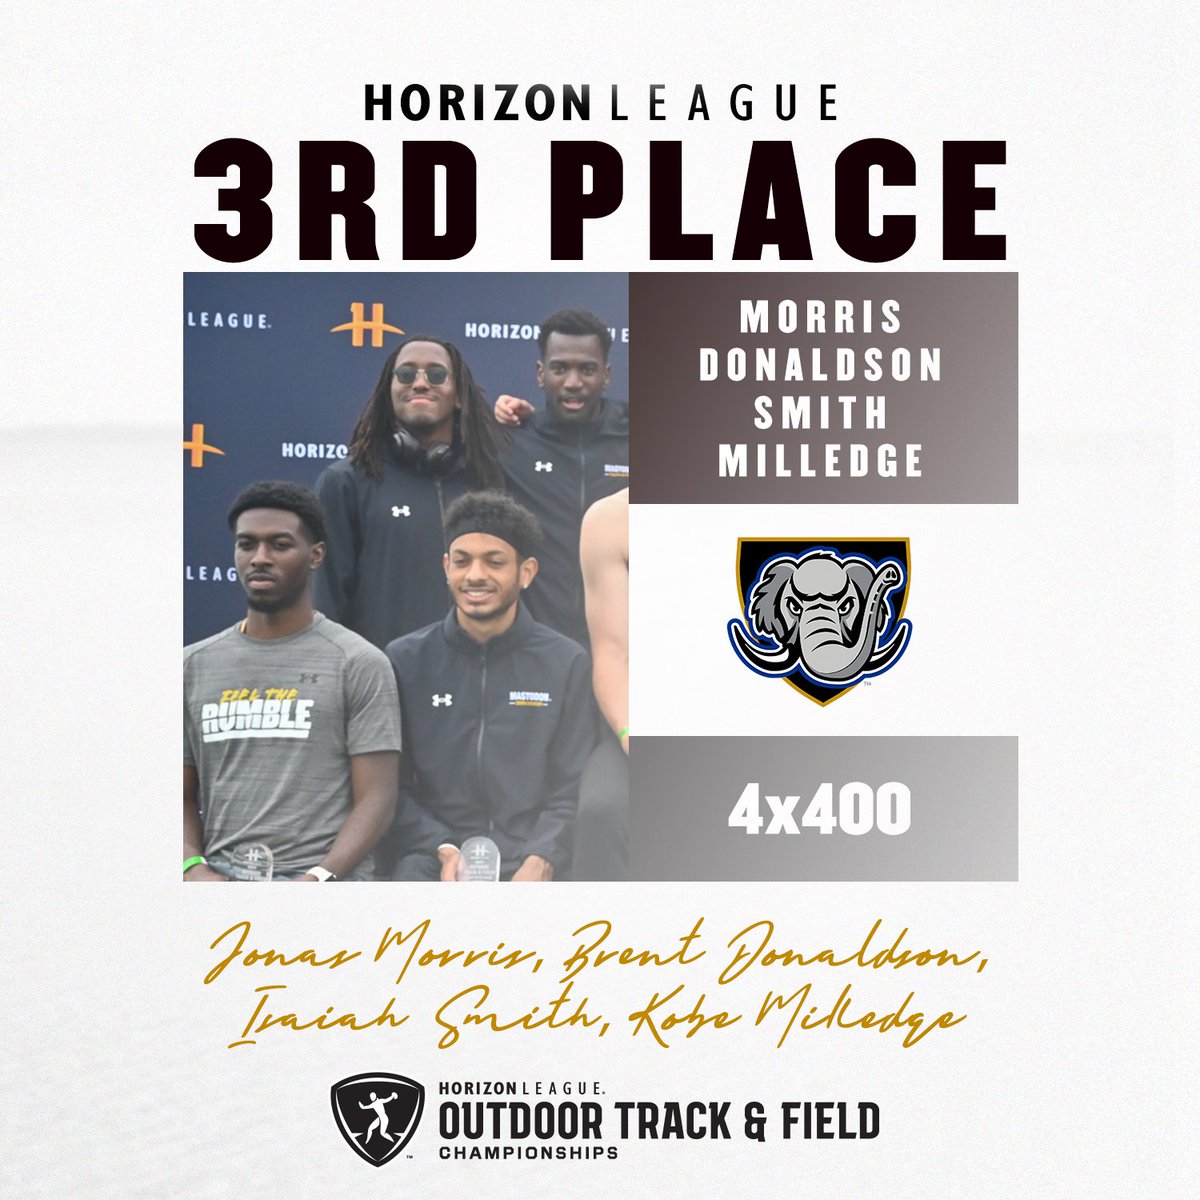 The Mastodon men took third int he 4x400 relay with a time of 3:16.68. 

#FeelTheRumble #HLTF